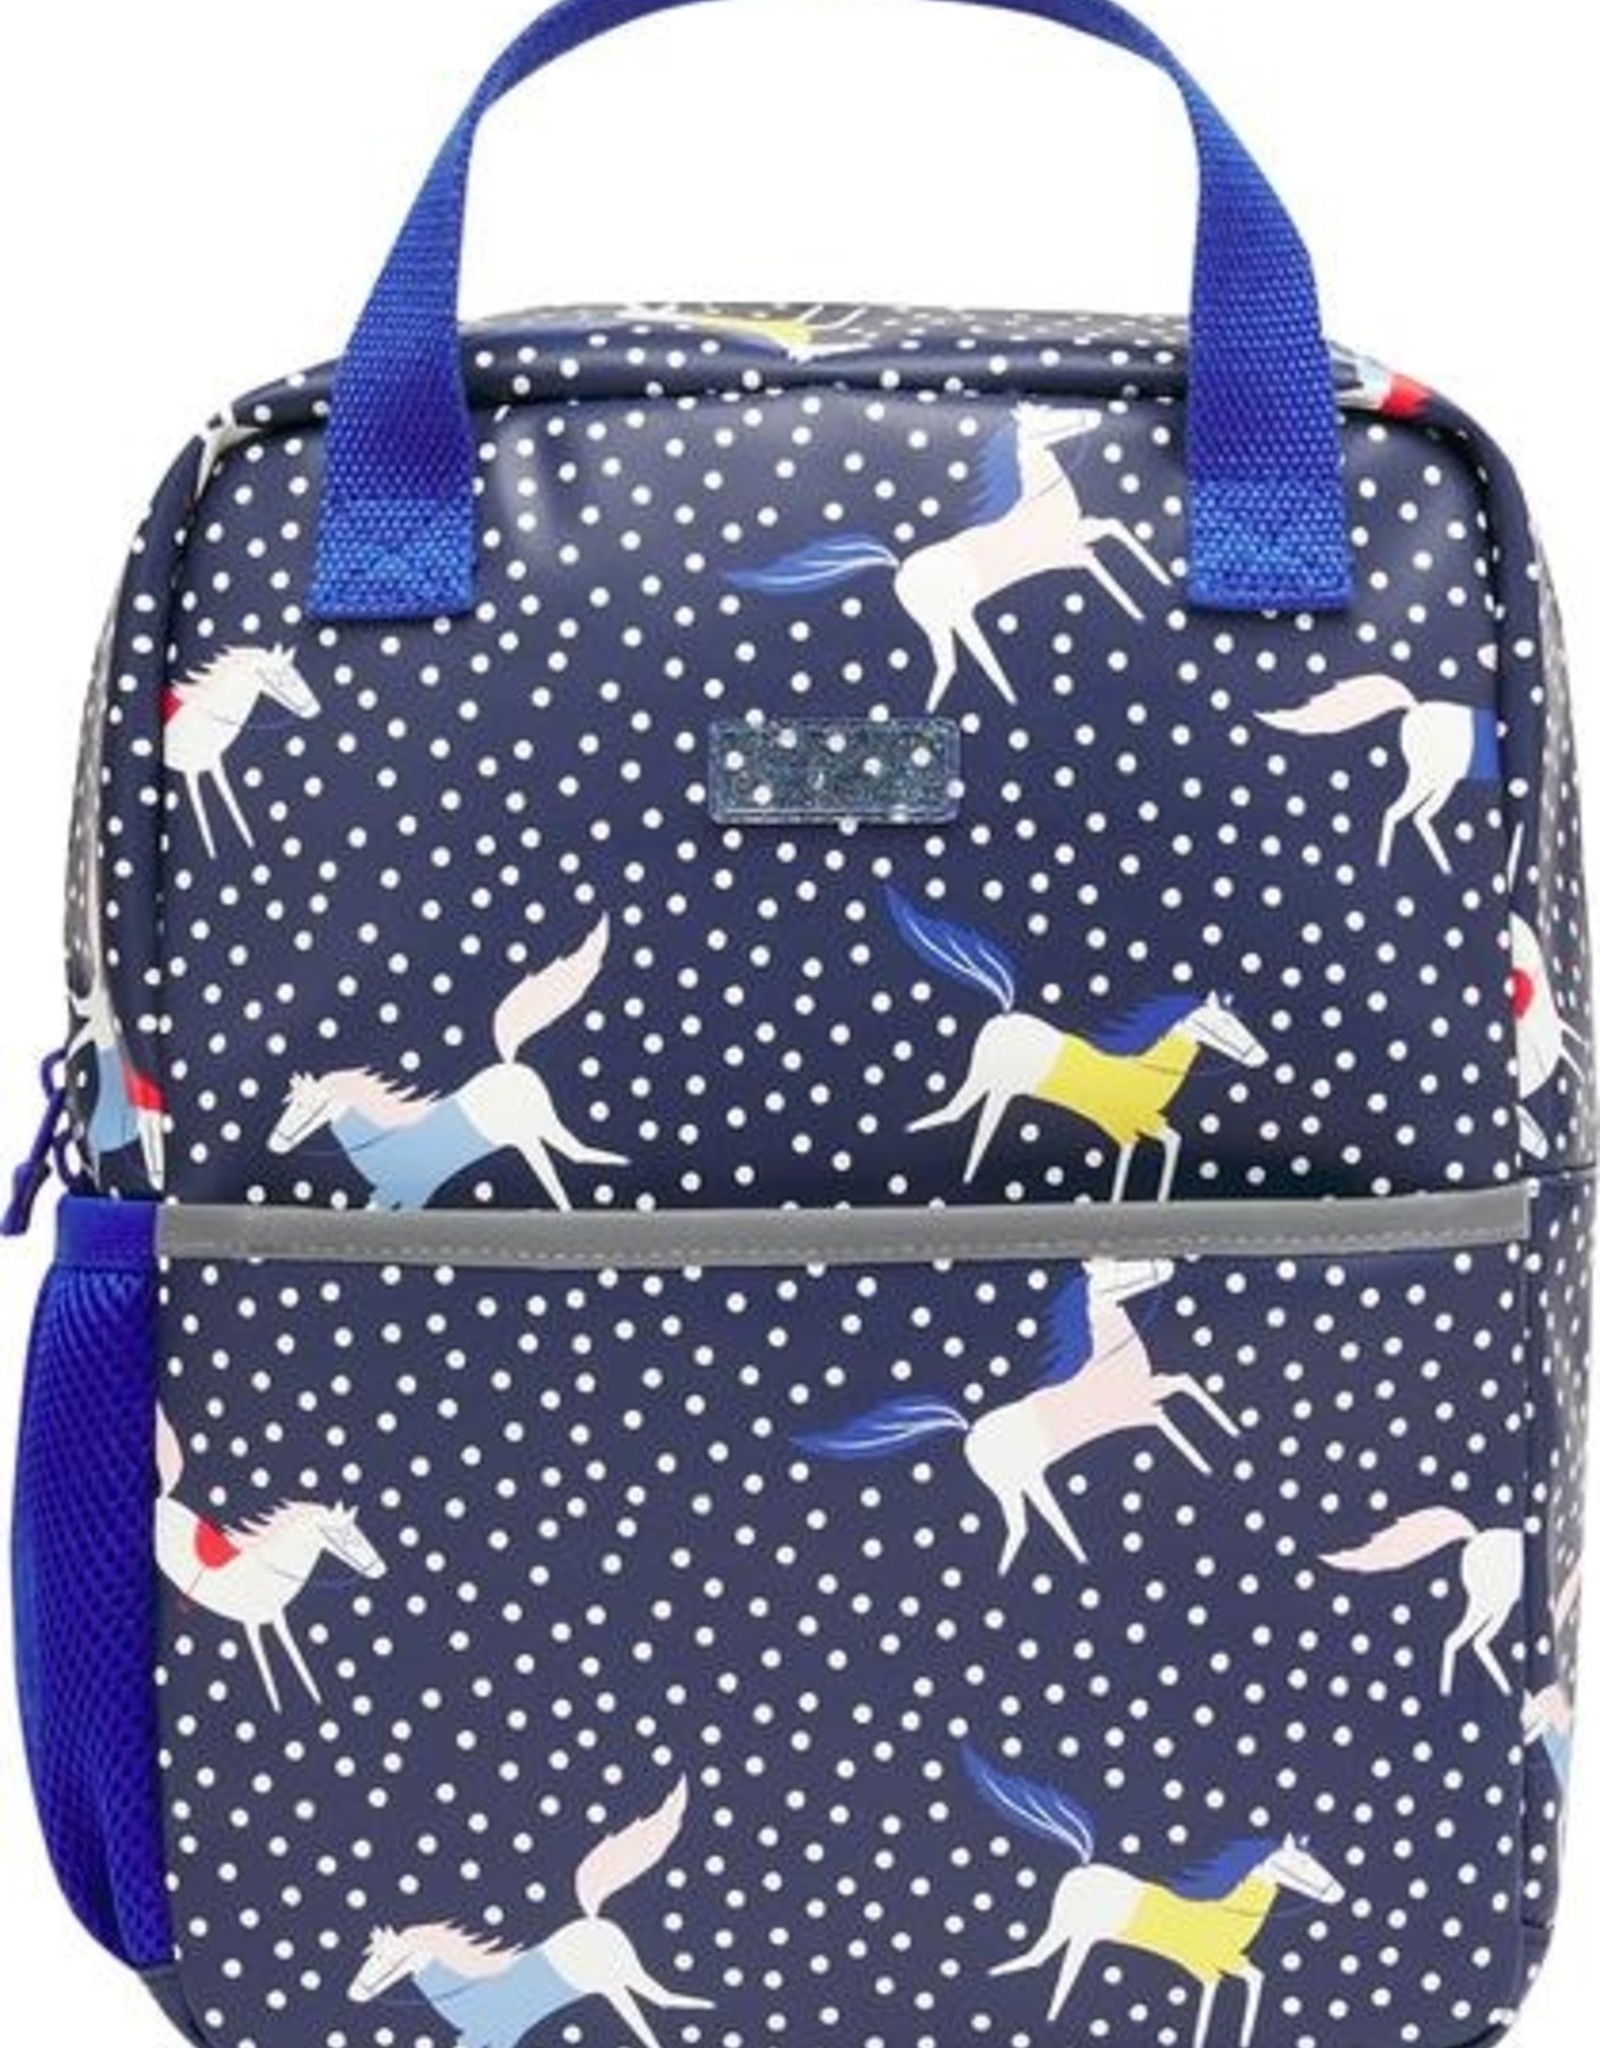 Joules FA21 Rubberized Backpacks